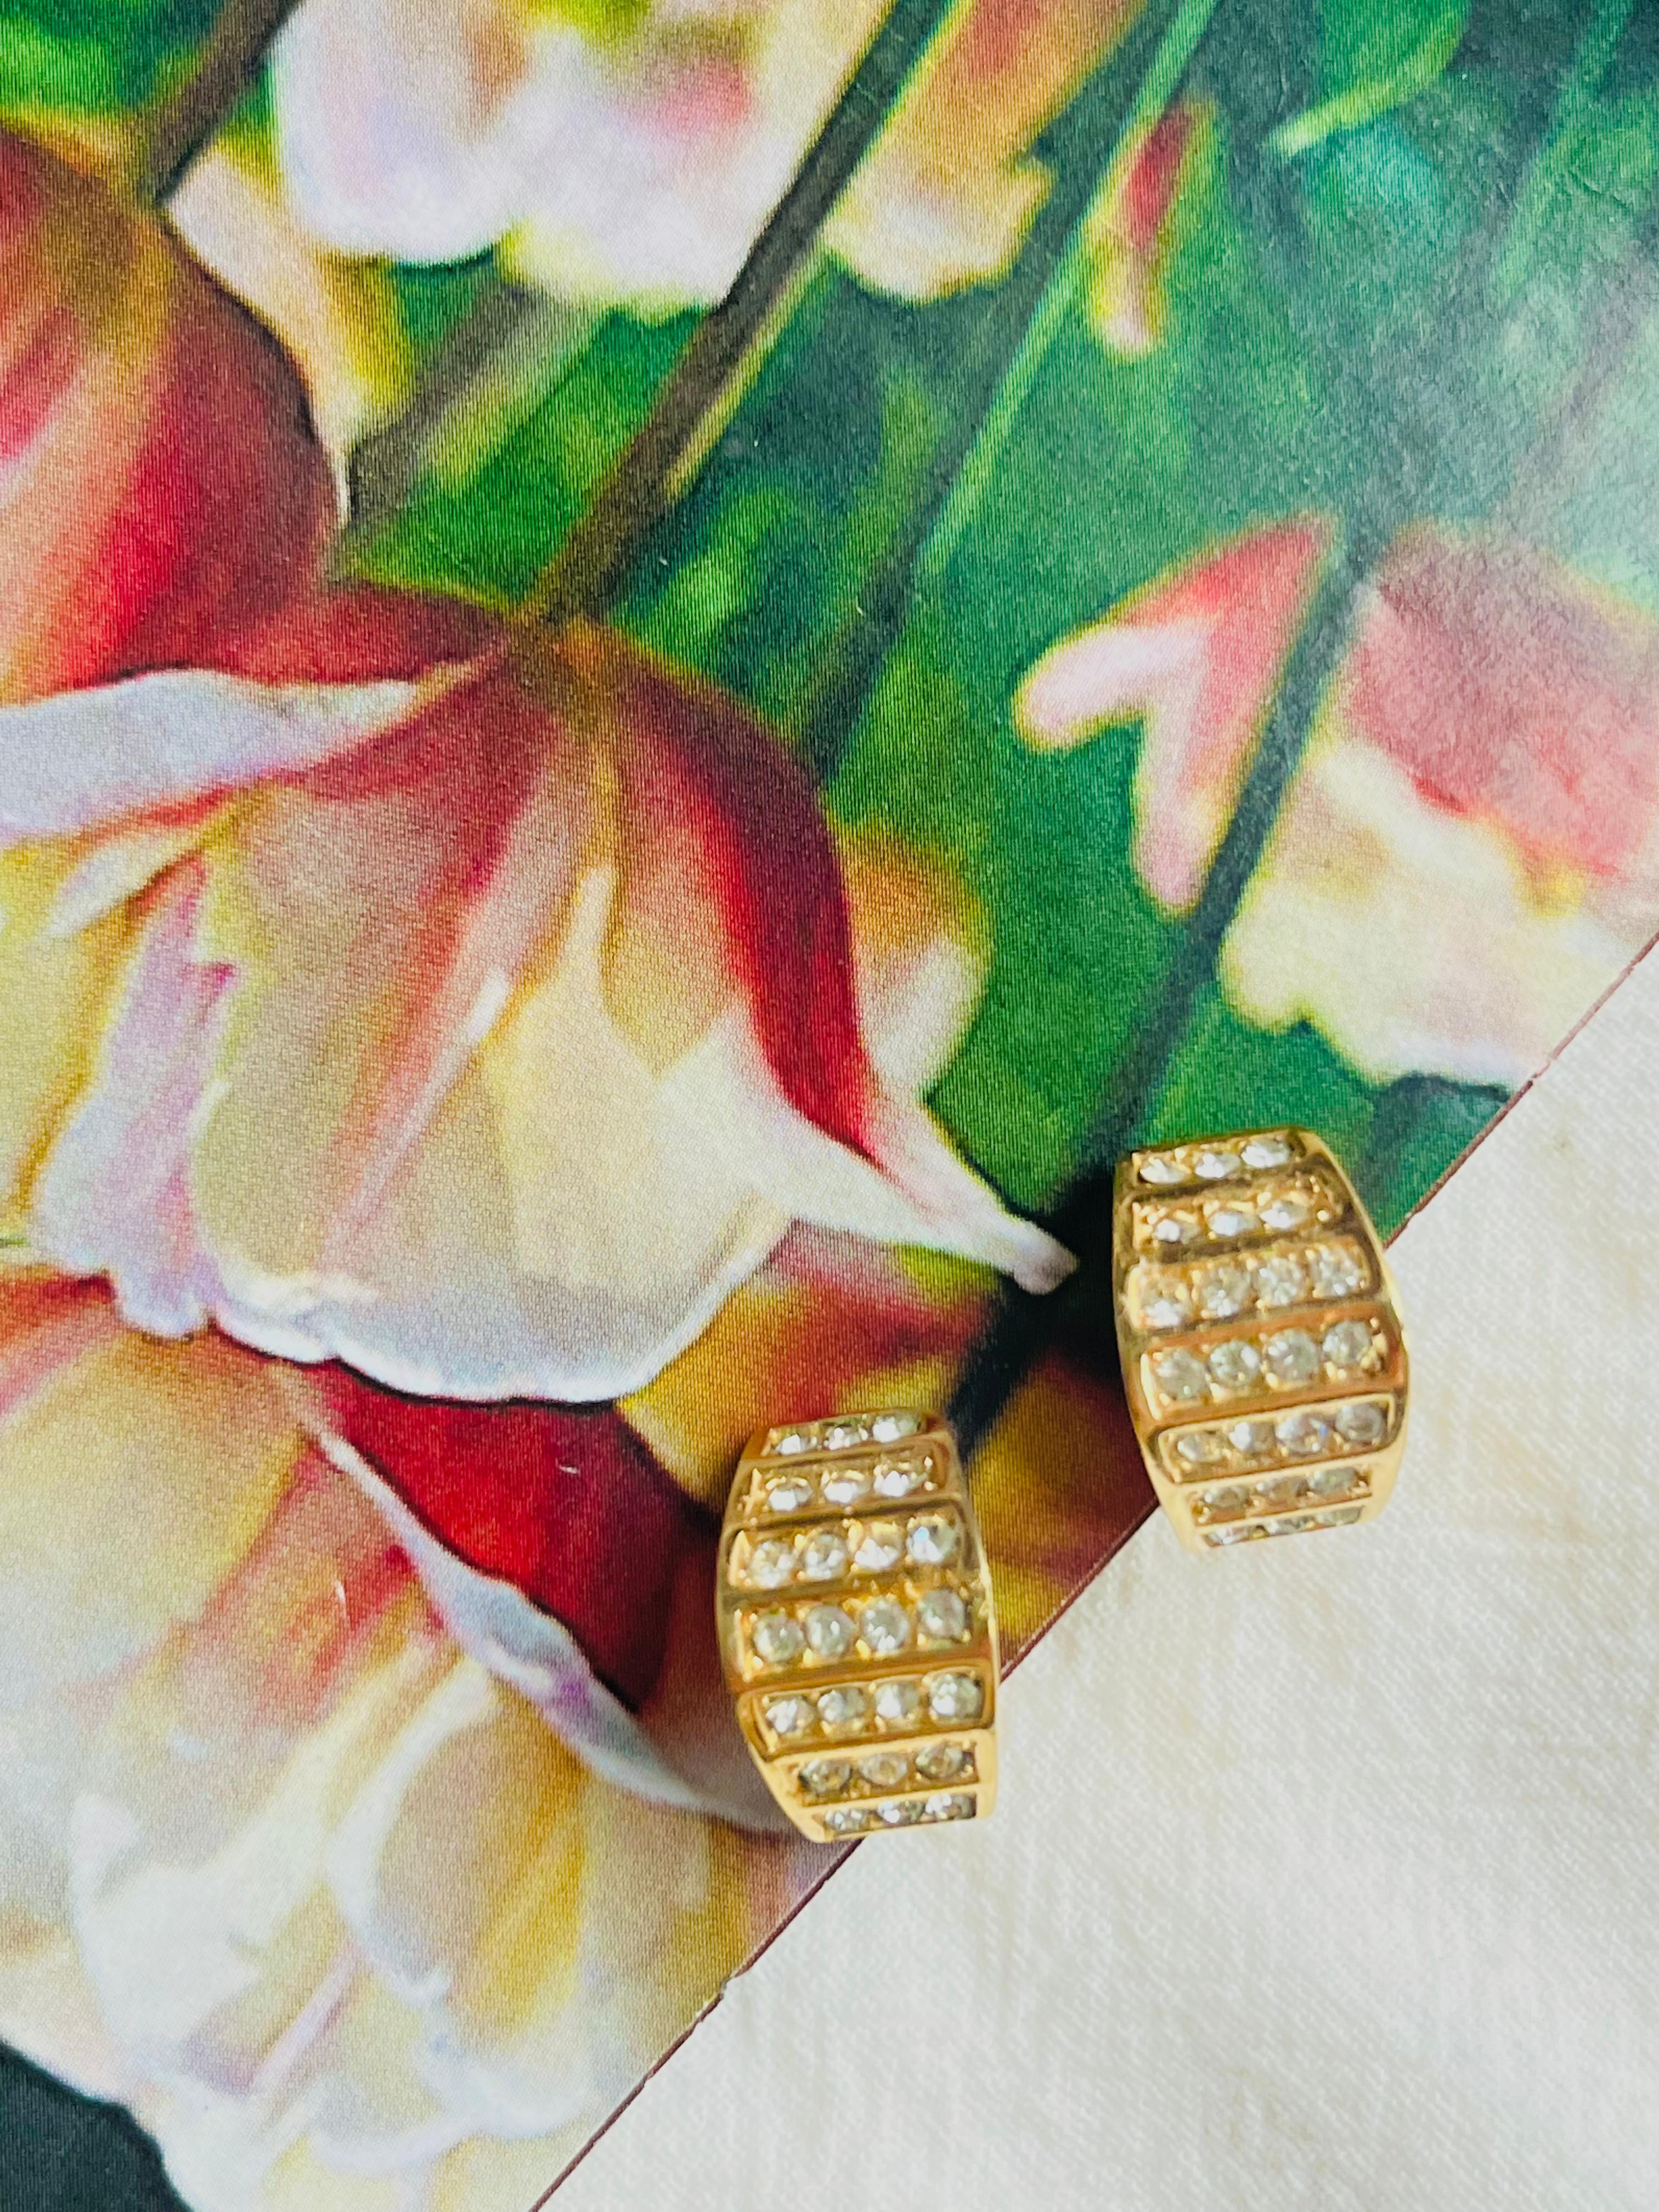 Christian Dior Vintage 1980s Whole Shining Half Hoop Crystal, Clip Earrings, Gold Tone

Very good condition. 100% Genuine. Some light scratches, barely noticeable. 

A very beautiful pair of rhinestone clip on earrings by Chr. DIOR, signed at the